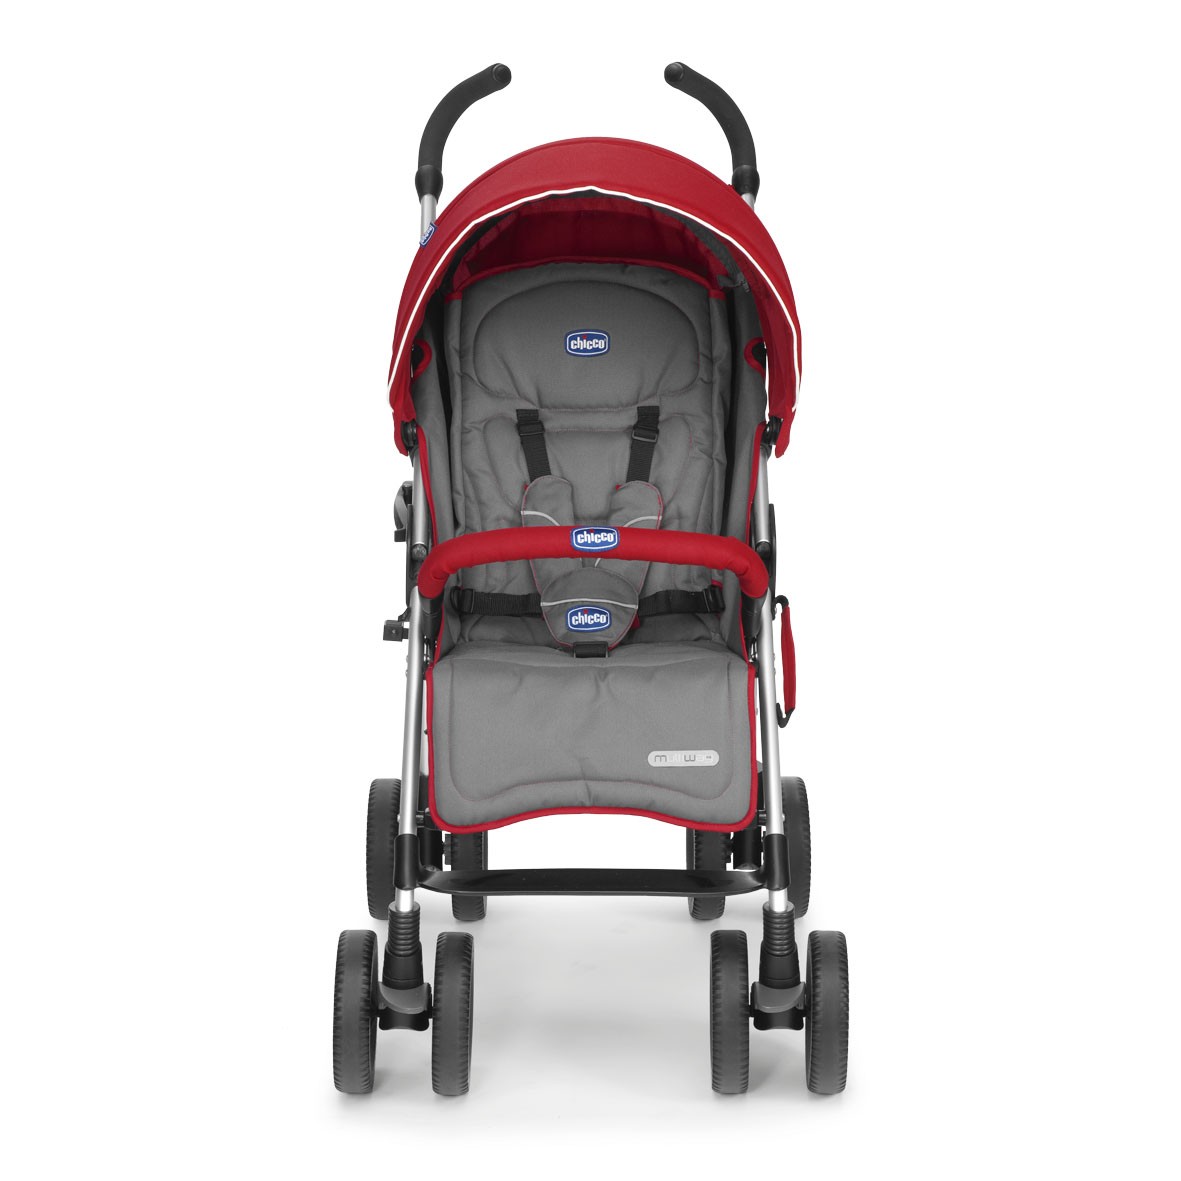 Chicco Multiway Evo stroller reviews, questions, dimensions pushchair experts advise @Strollberry